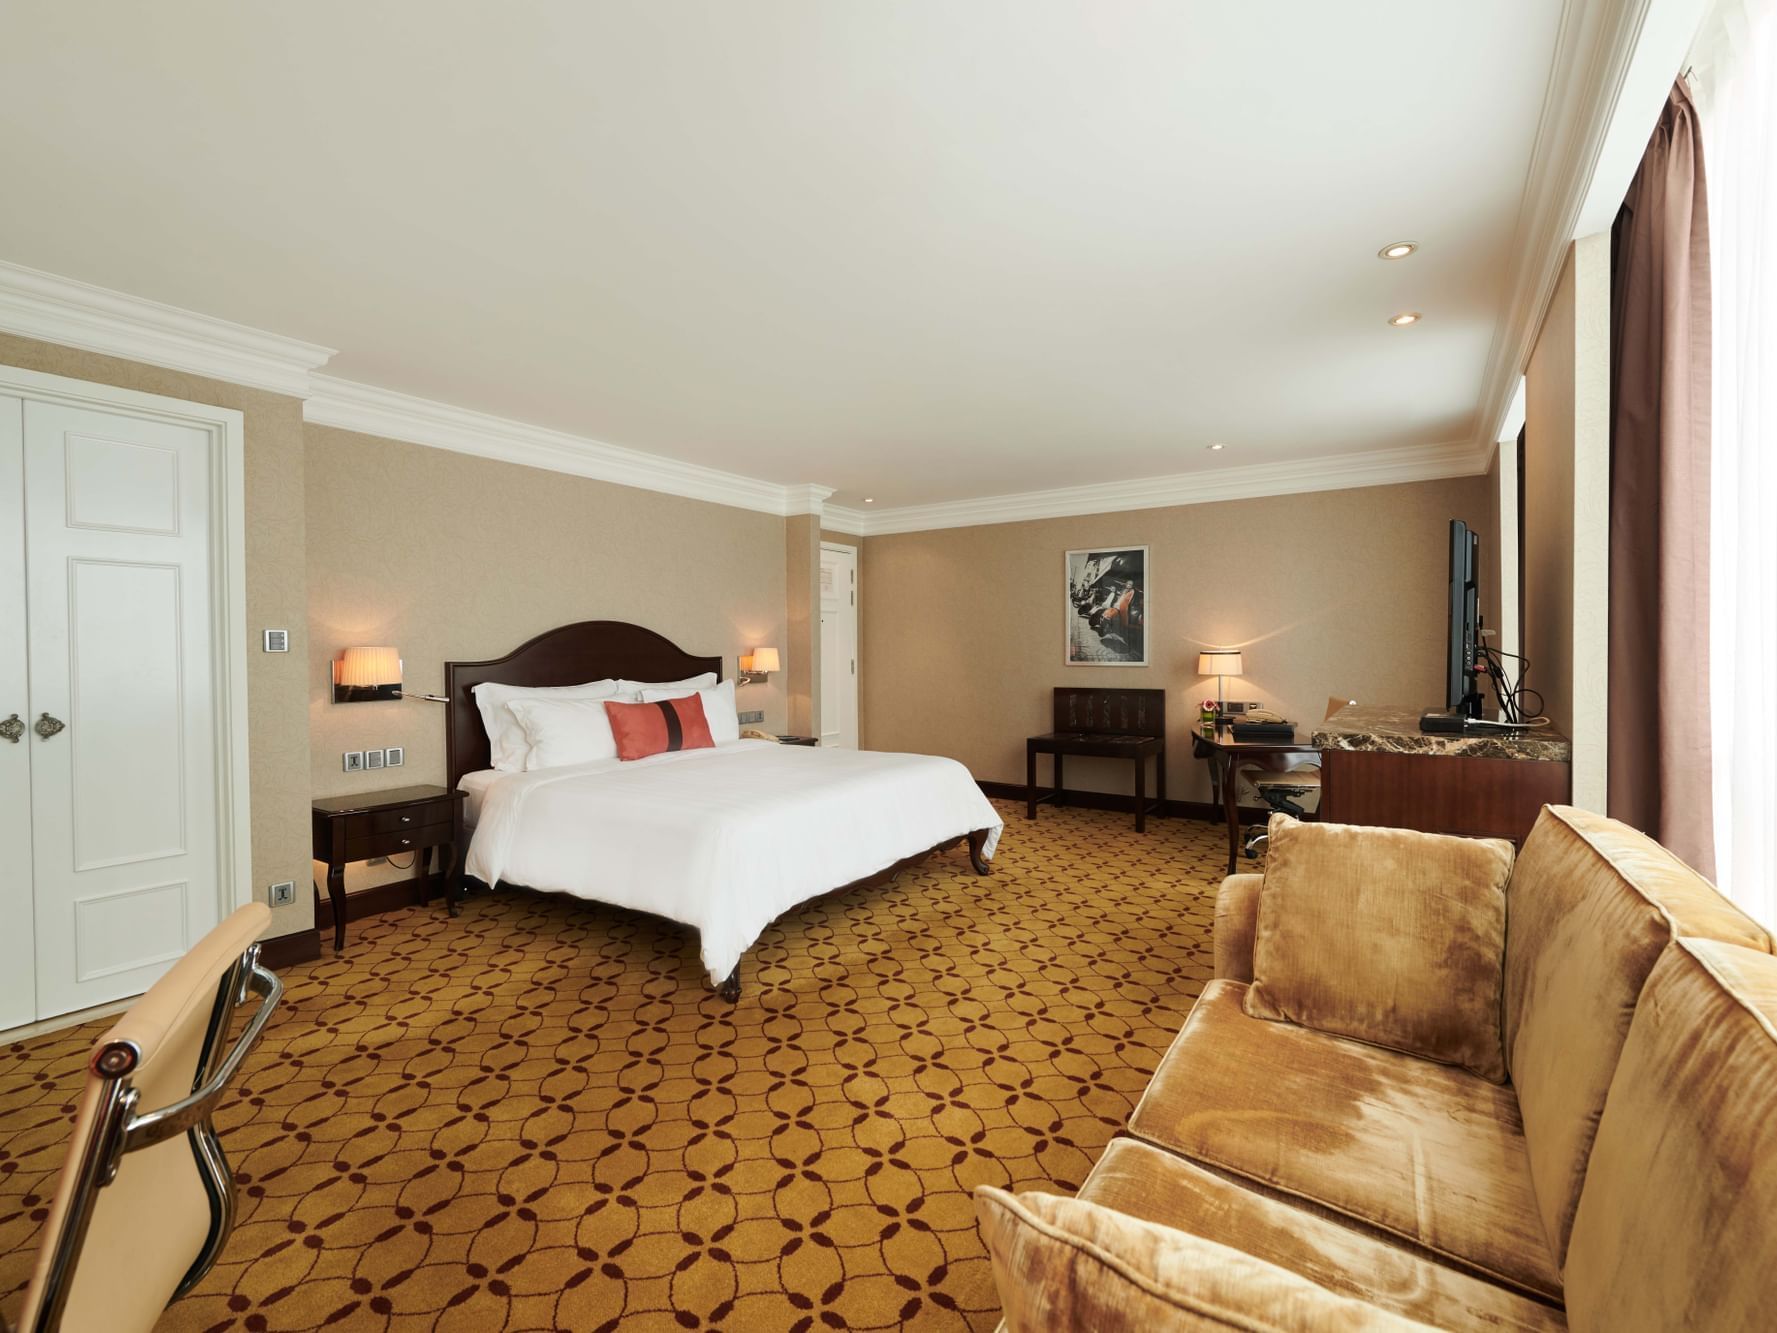 Family Deluxe Room with a king size bed, TV & a comfy sofa at Eastin Grand Hotel Saigon